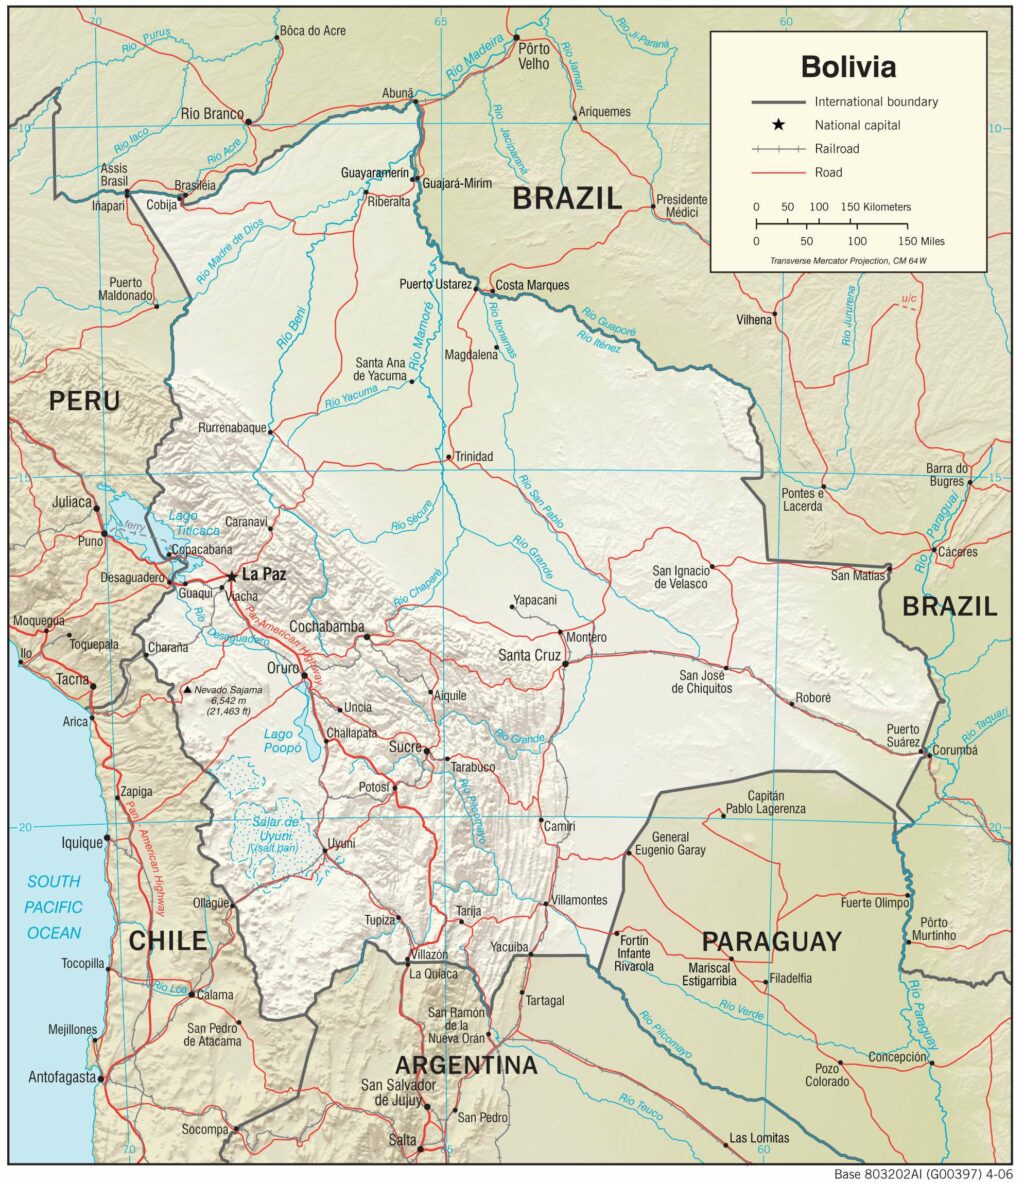 Bolivia physiography map.